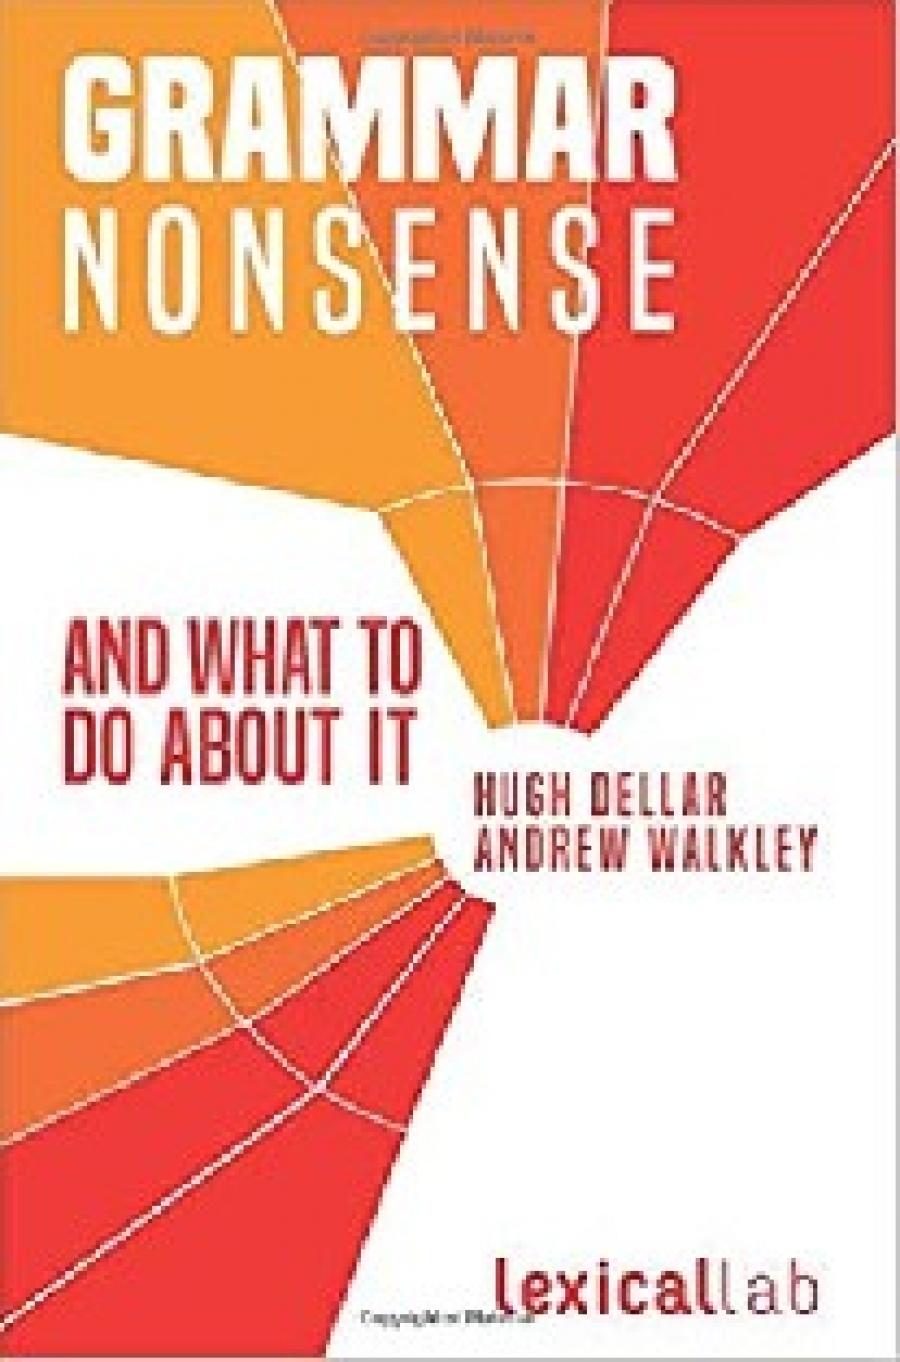 Dellar, Walkley, Andrew (Author), Hugh (Author) Grammar Nonsense and What To Do about It 